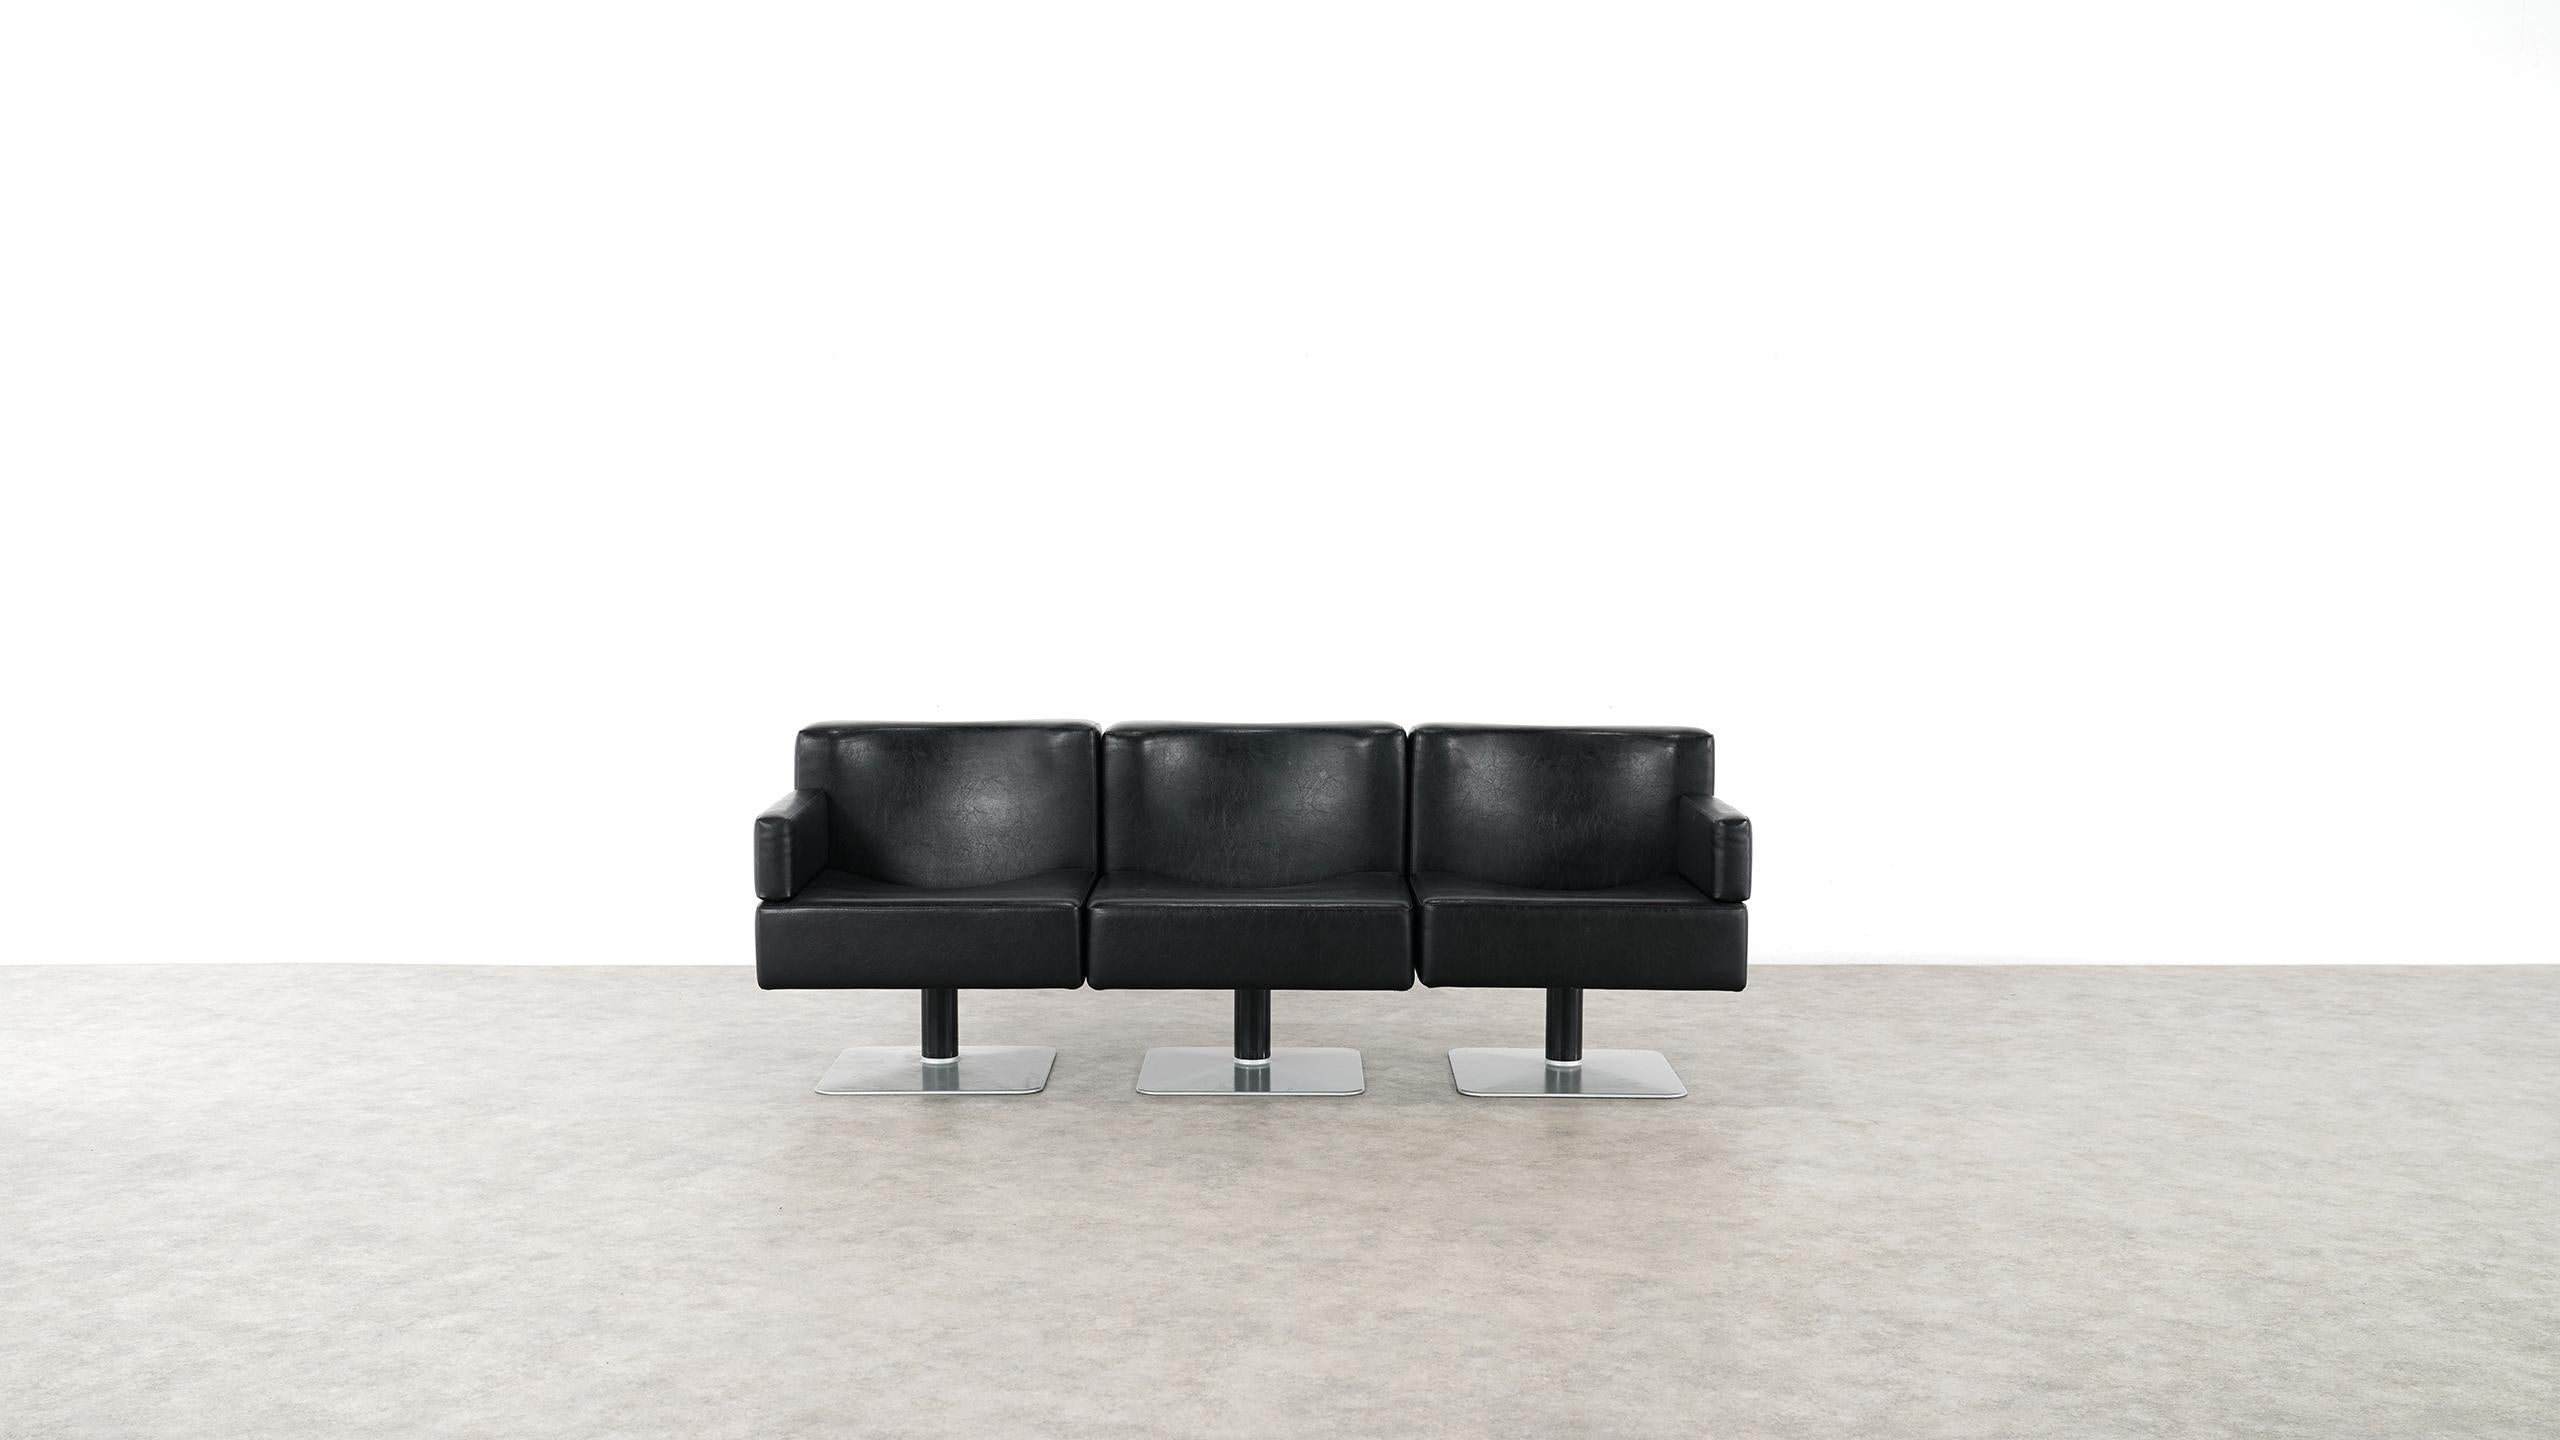 Modular Lounge Sofa or Chair or Table Set by Herbert Hirche 1974 Mauser, Germany 13